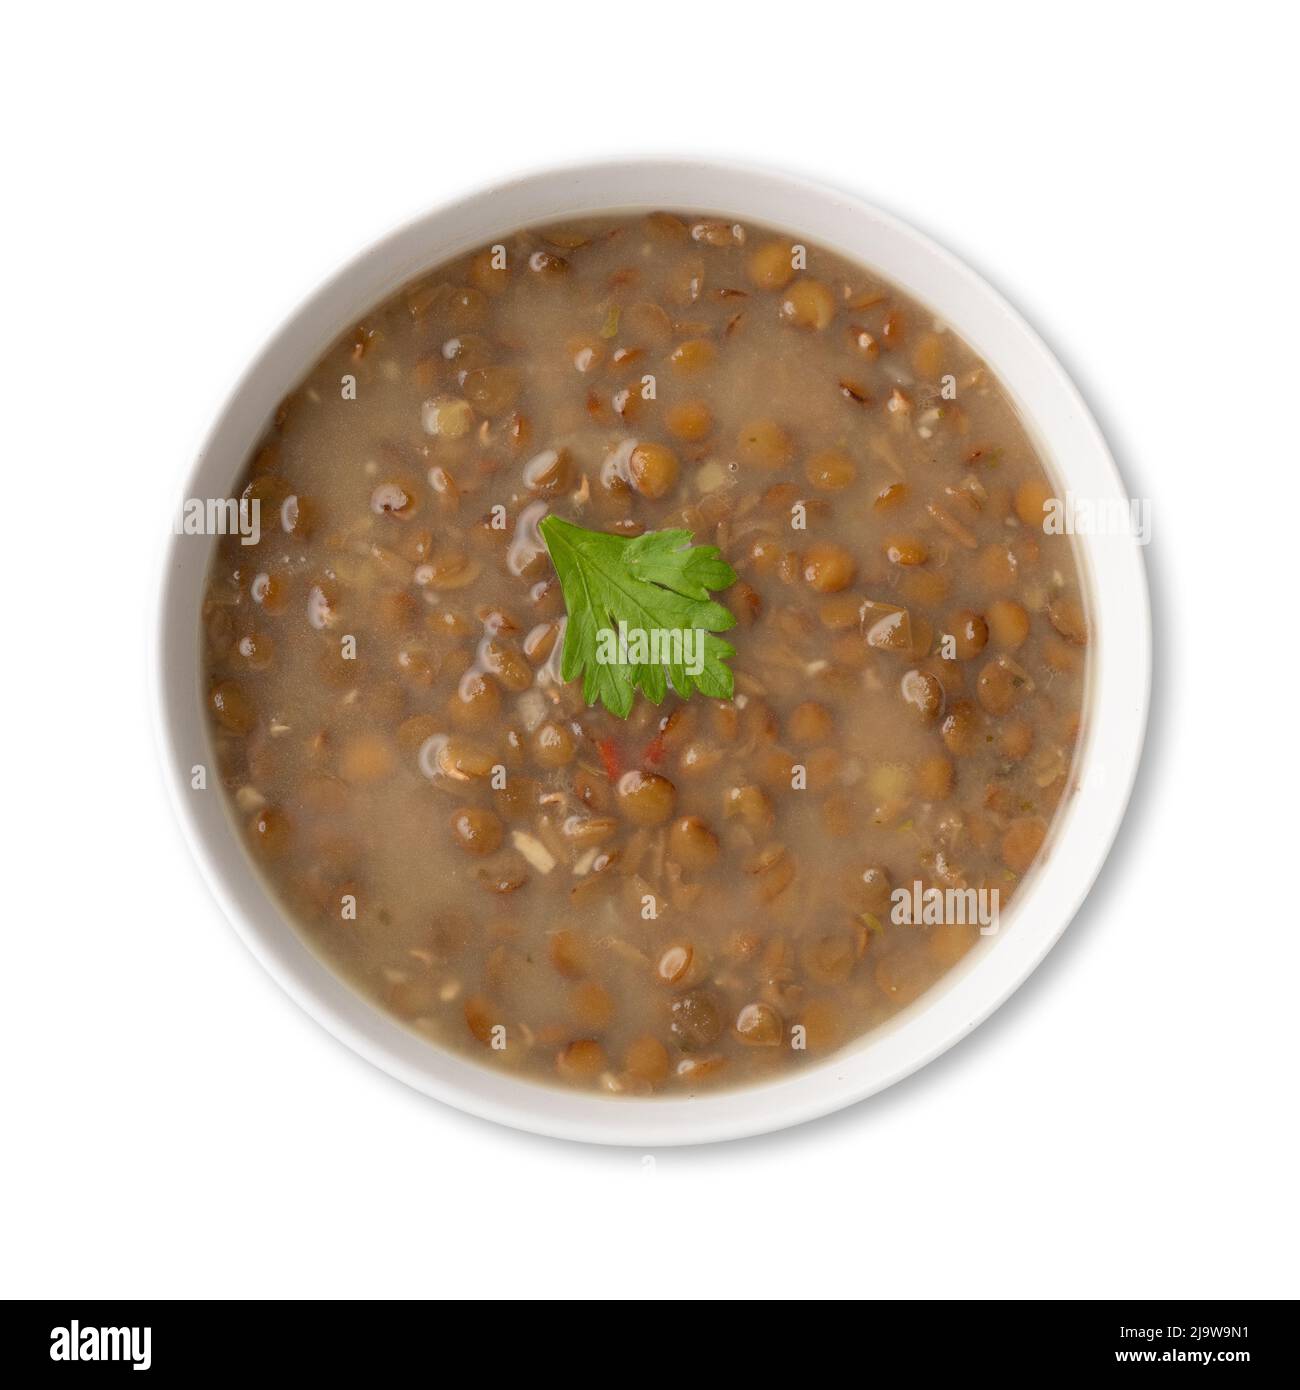 Lentil soup in a bowl with seasoning isolated over white background. Stock Photo